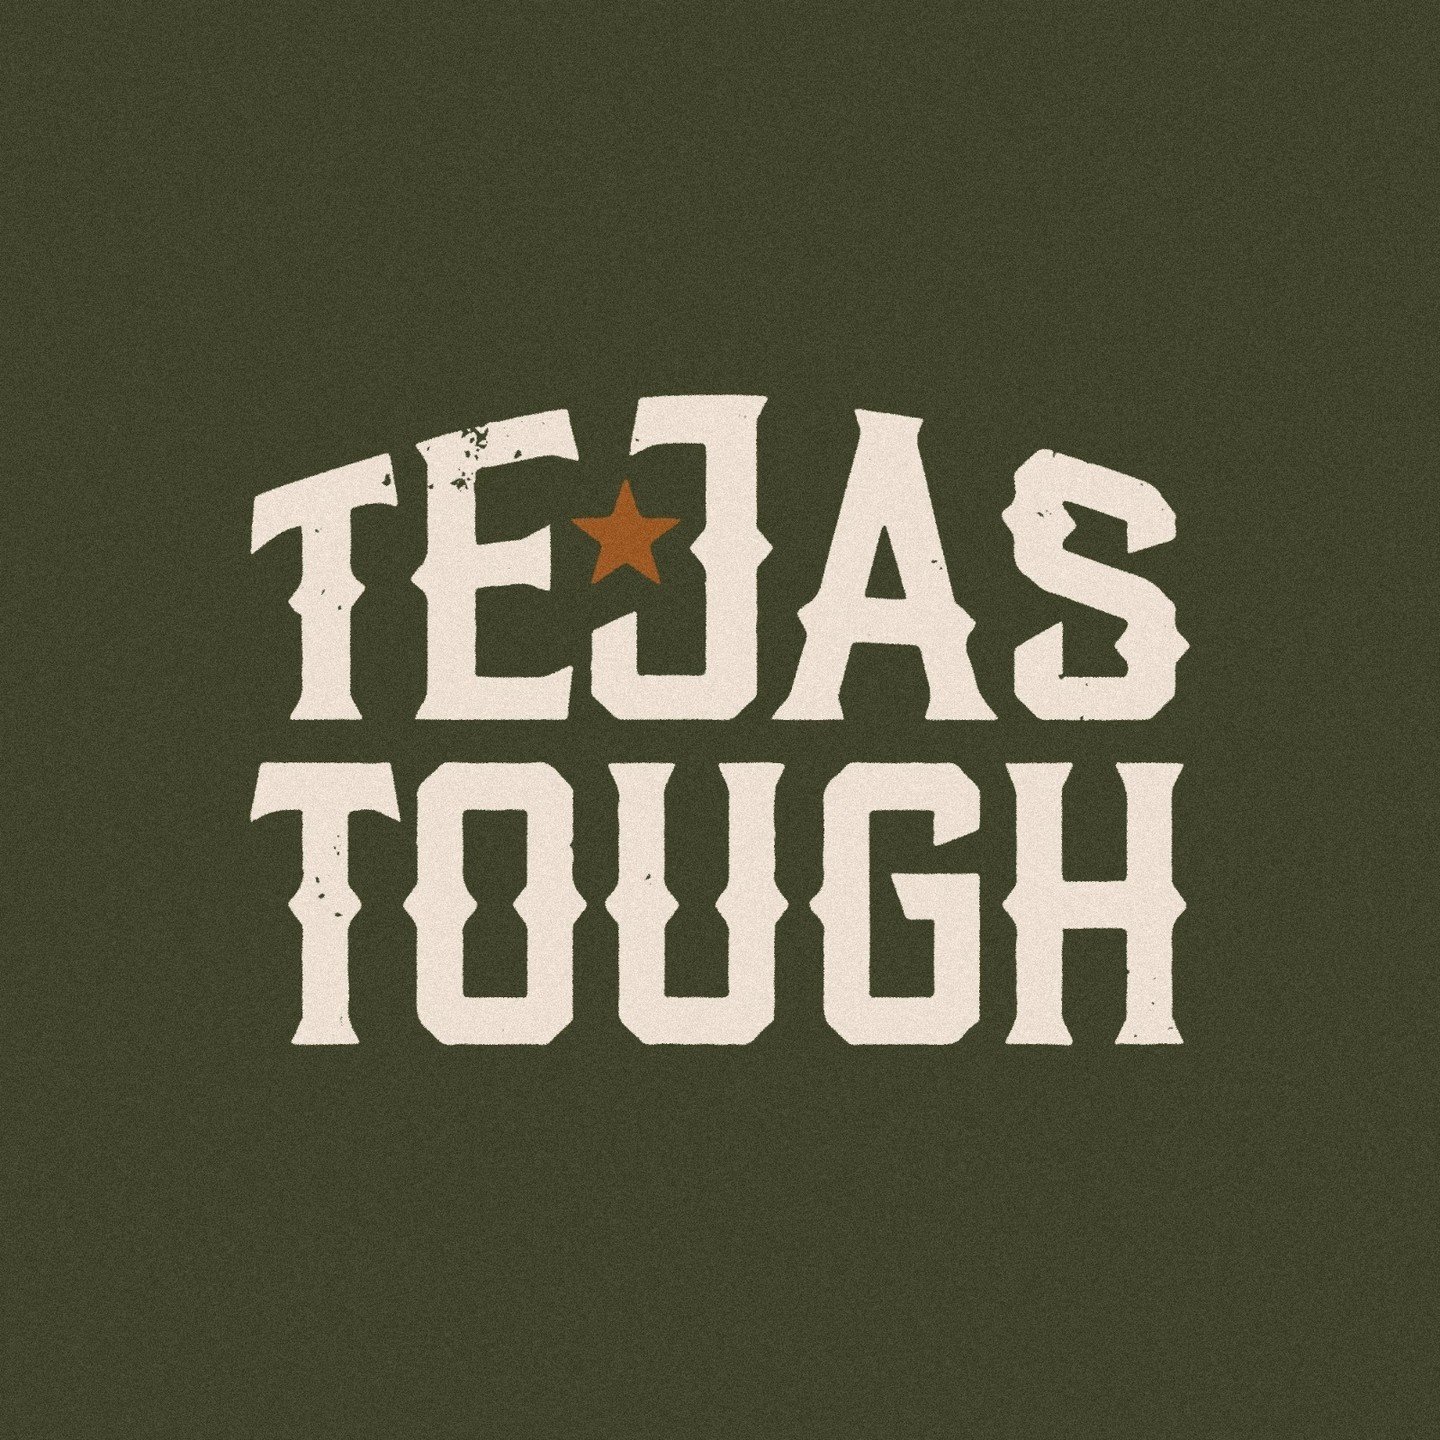 Fresh graphics designed for @tejasroofworks expanding on their established identity. This was a fun one! 
.
.
.
.
.
#graphicdesign #graphicdesigner #texas #tejas #tejasroofworks #typography #lettering #texture #merchdesign #apparelgraphics #screenpri